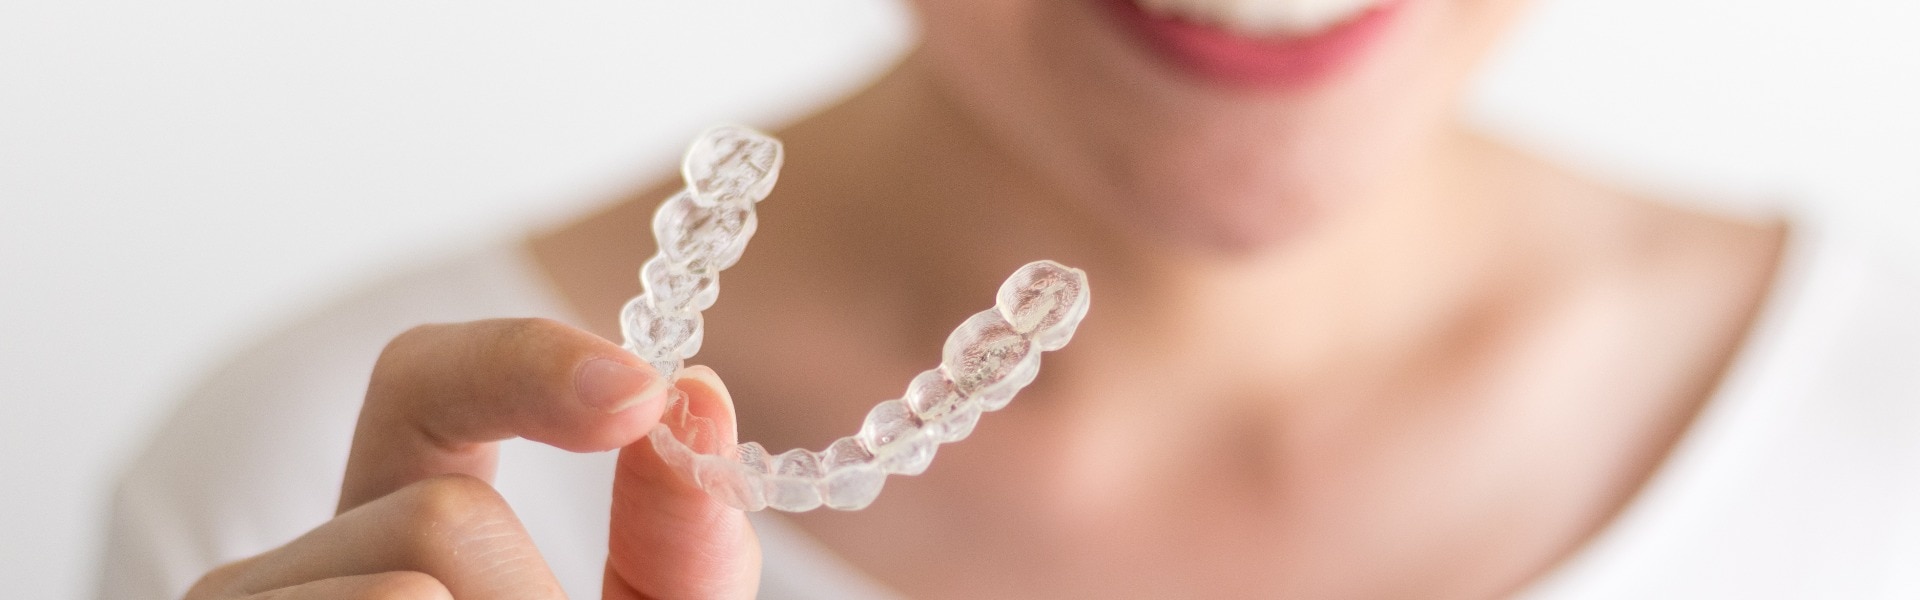 A smiling woman holding invisalign or invisible braces orthodontic equipment jpg